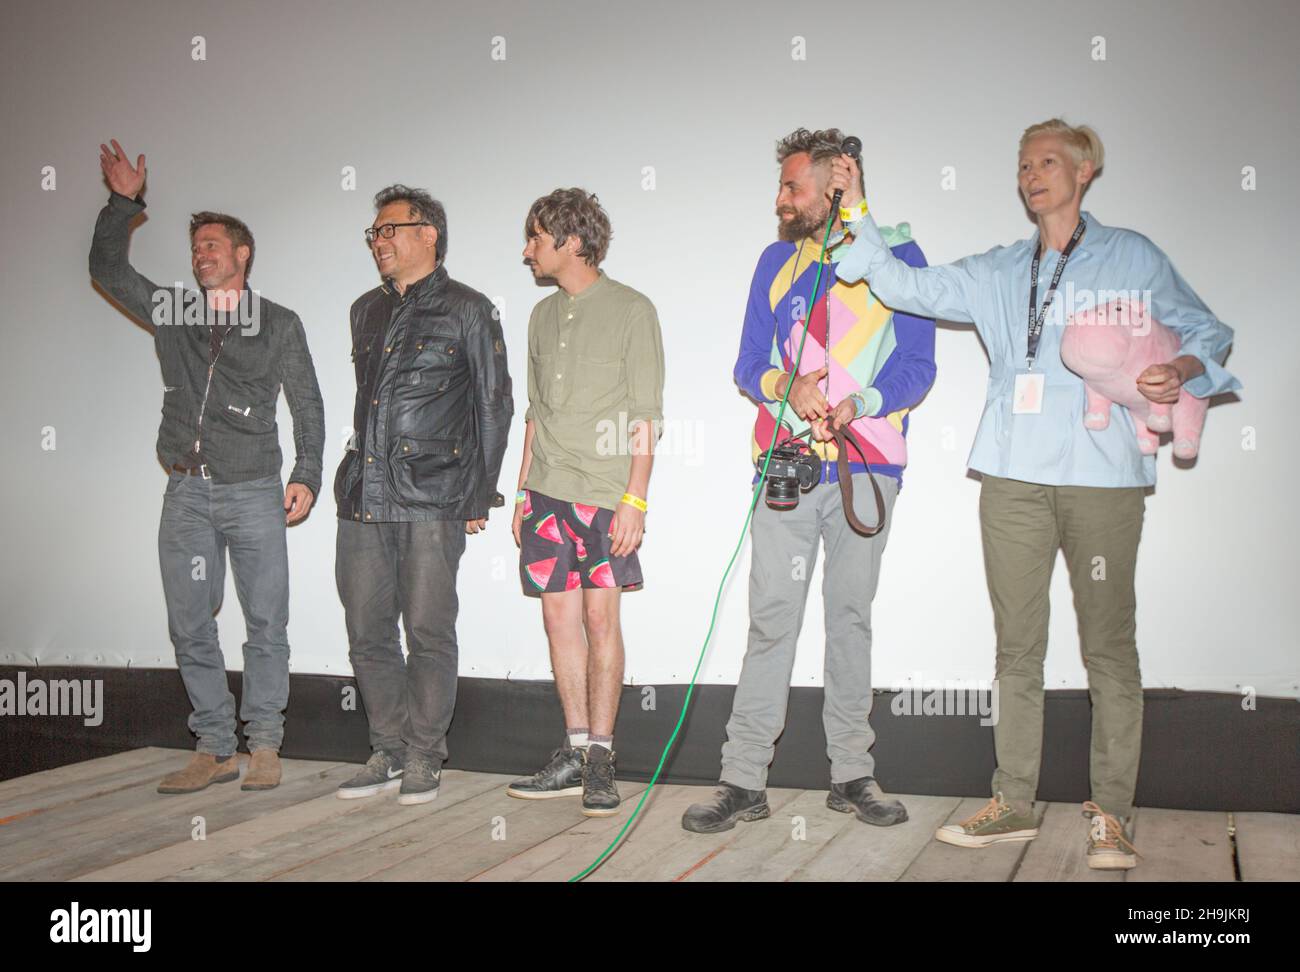 (left to right) Brad Pitt and Dooho Choi (co-producers) and member of the cast Devon Bostick, Sandro Kopp (co-producer) and member of the cast and co-producer Tilda Swinton introducing a special screening of the South-Korean American Netflix film Okja at the Pilton Palais cinema tent on Day 1 of the 2017 Glastonbury Festival at Worthy Farm in Somerset. Photo date: Saturday, June 24, 2017. Photo credit should read: Richard Gray/EMPICS Entertainment Stock Photo